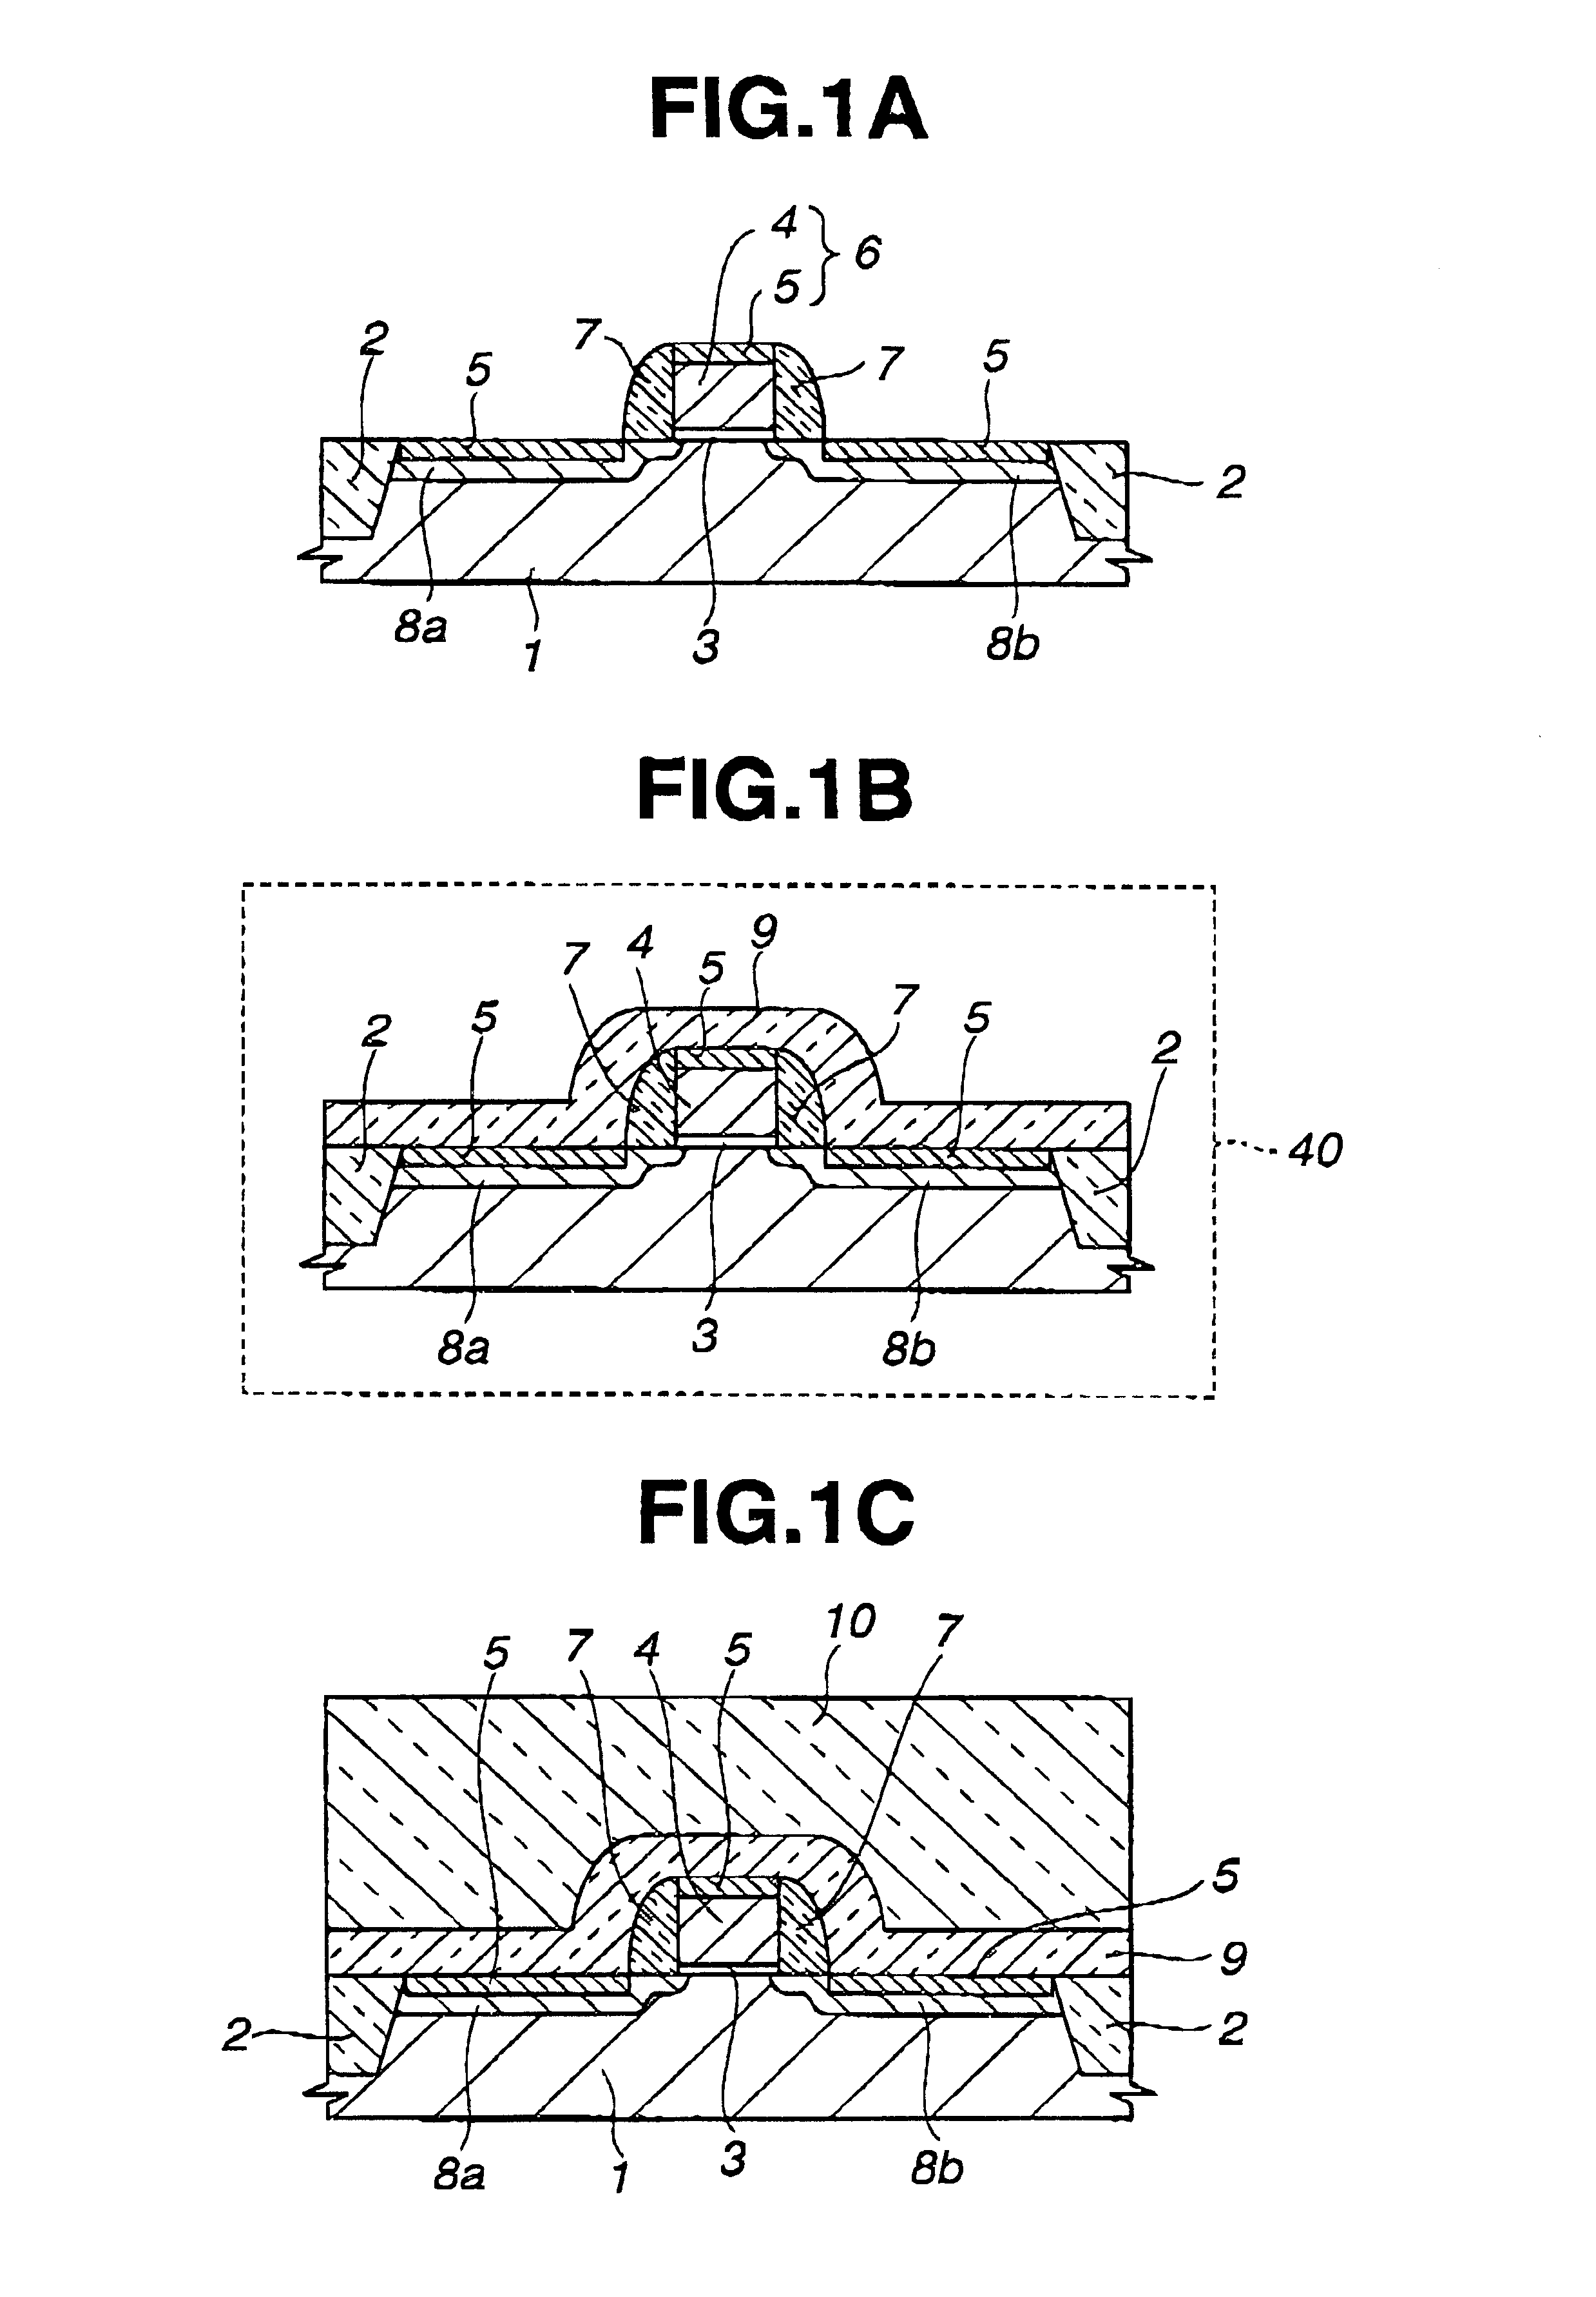 Enhanced deposition control in fabricating devices in a semiconductor wafer